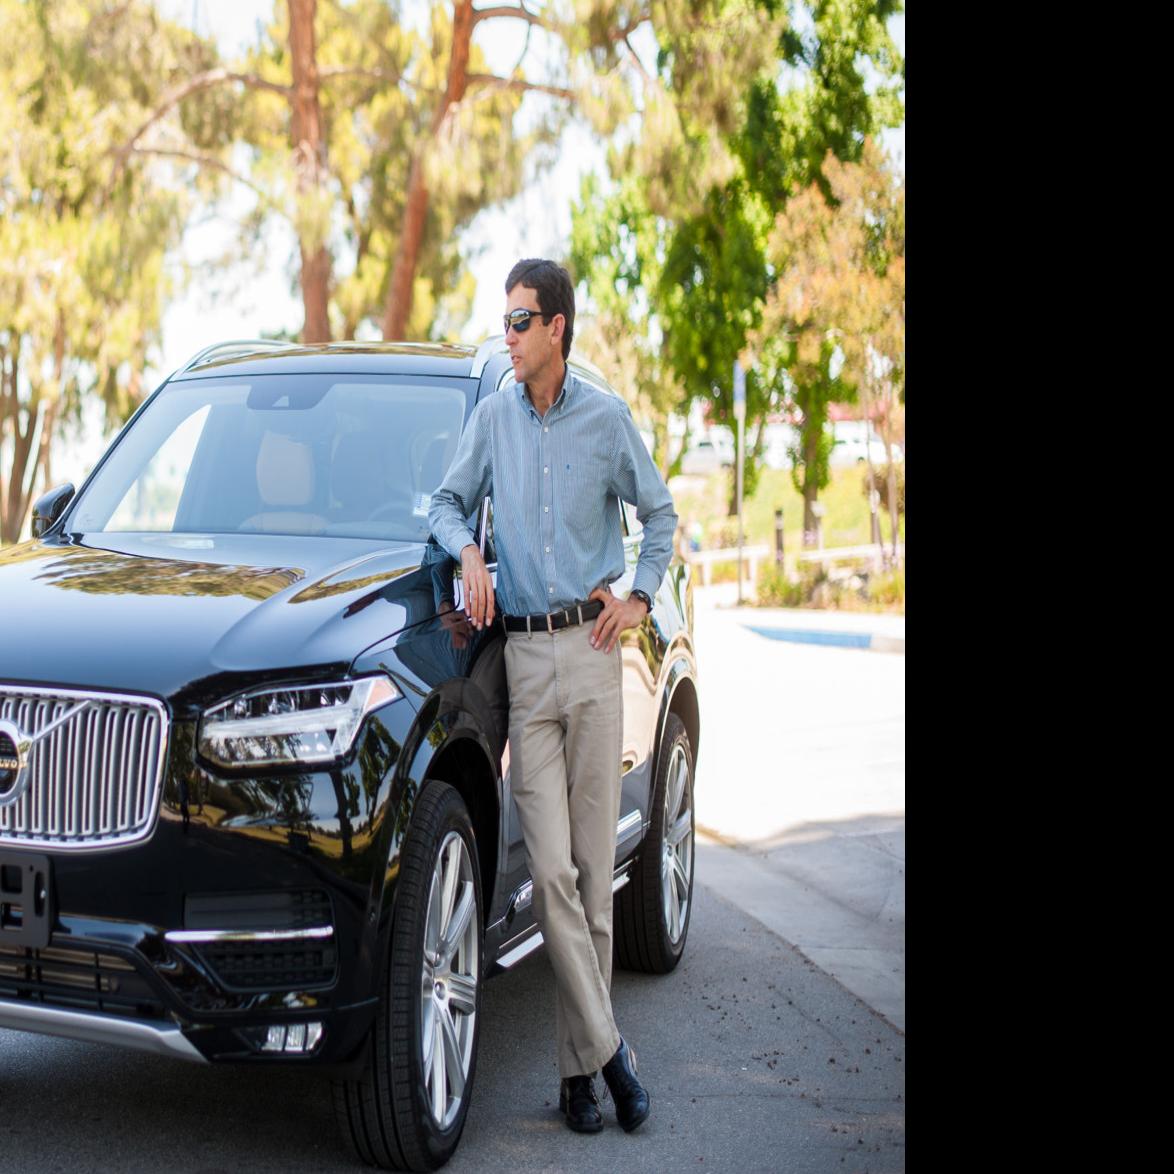 An ode to the Volvo XC90 – the people's family car of dreams